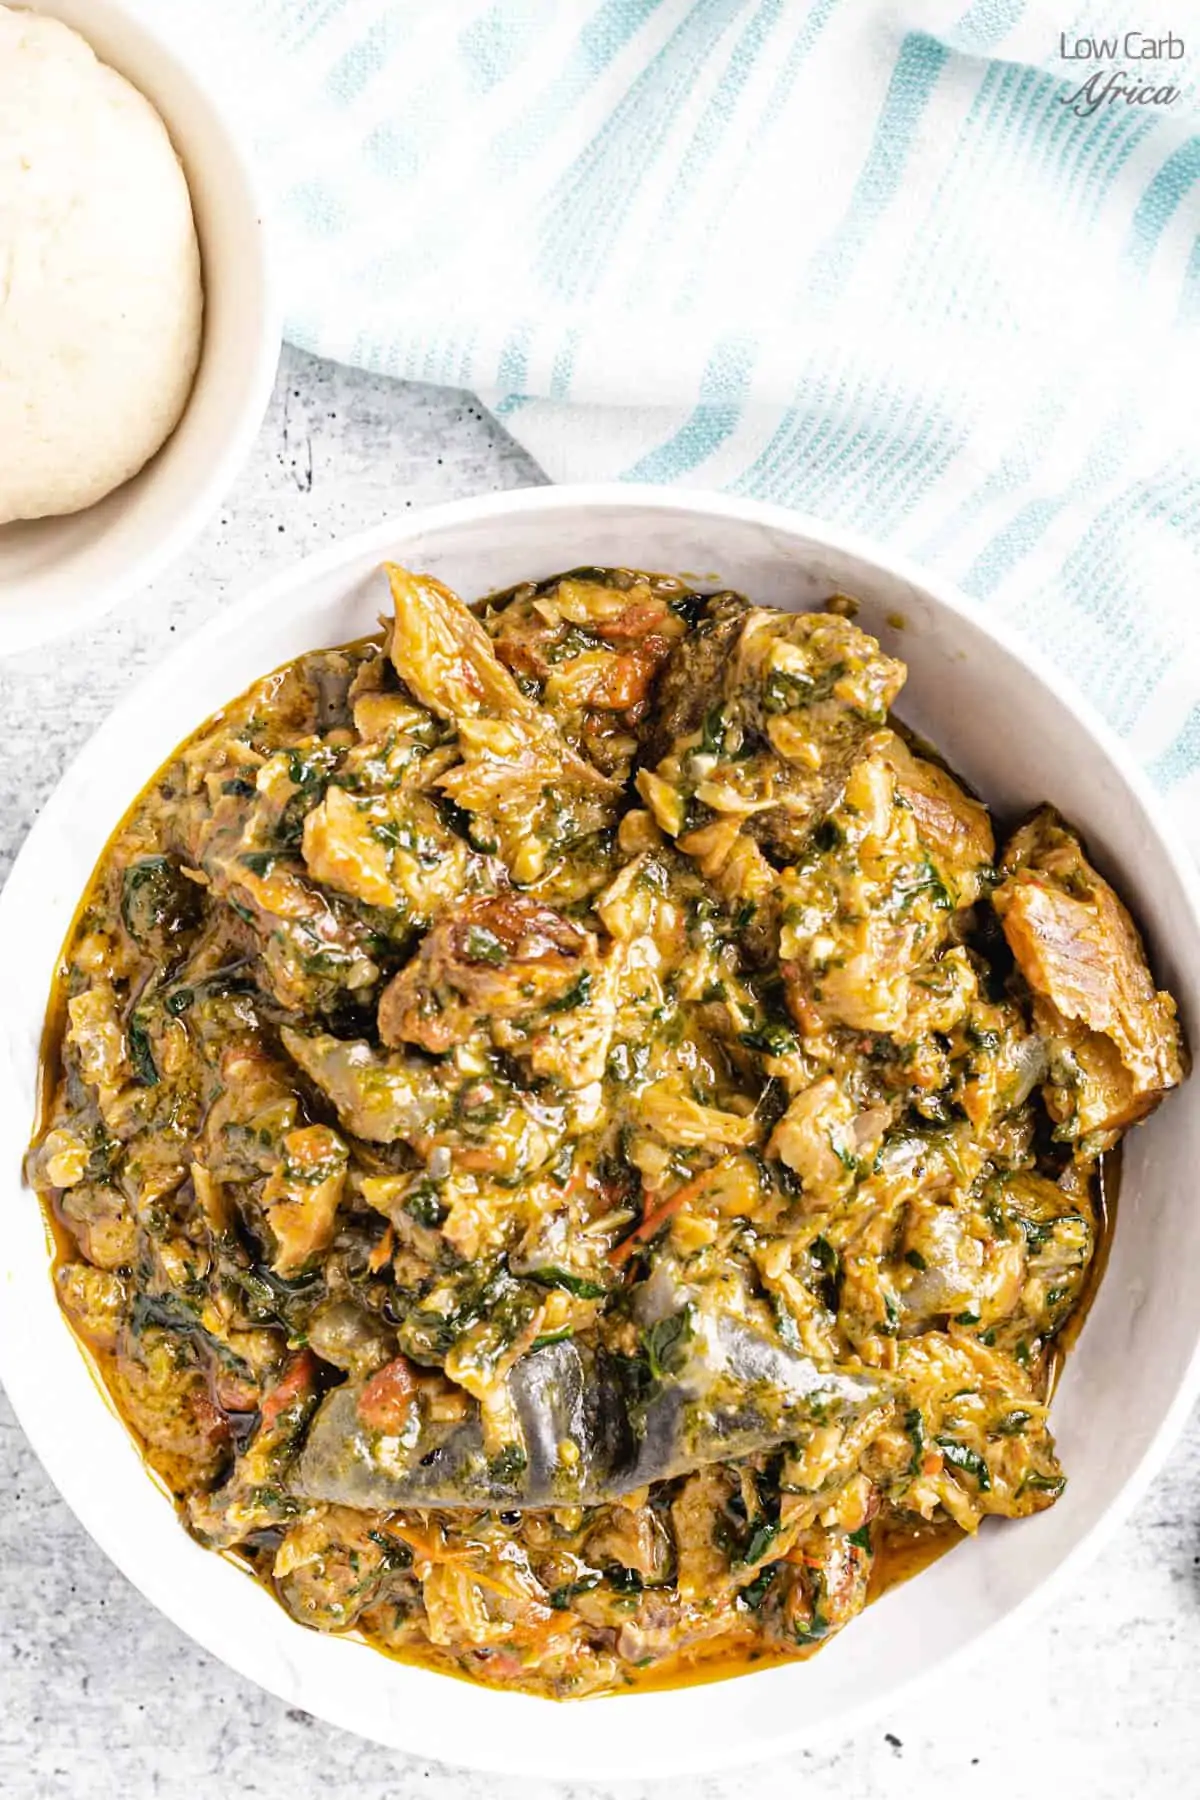 Fumbwa spinach stew on a white plate